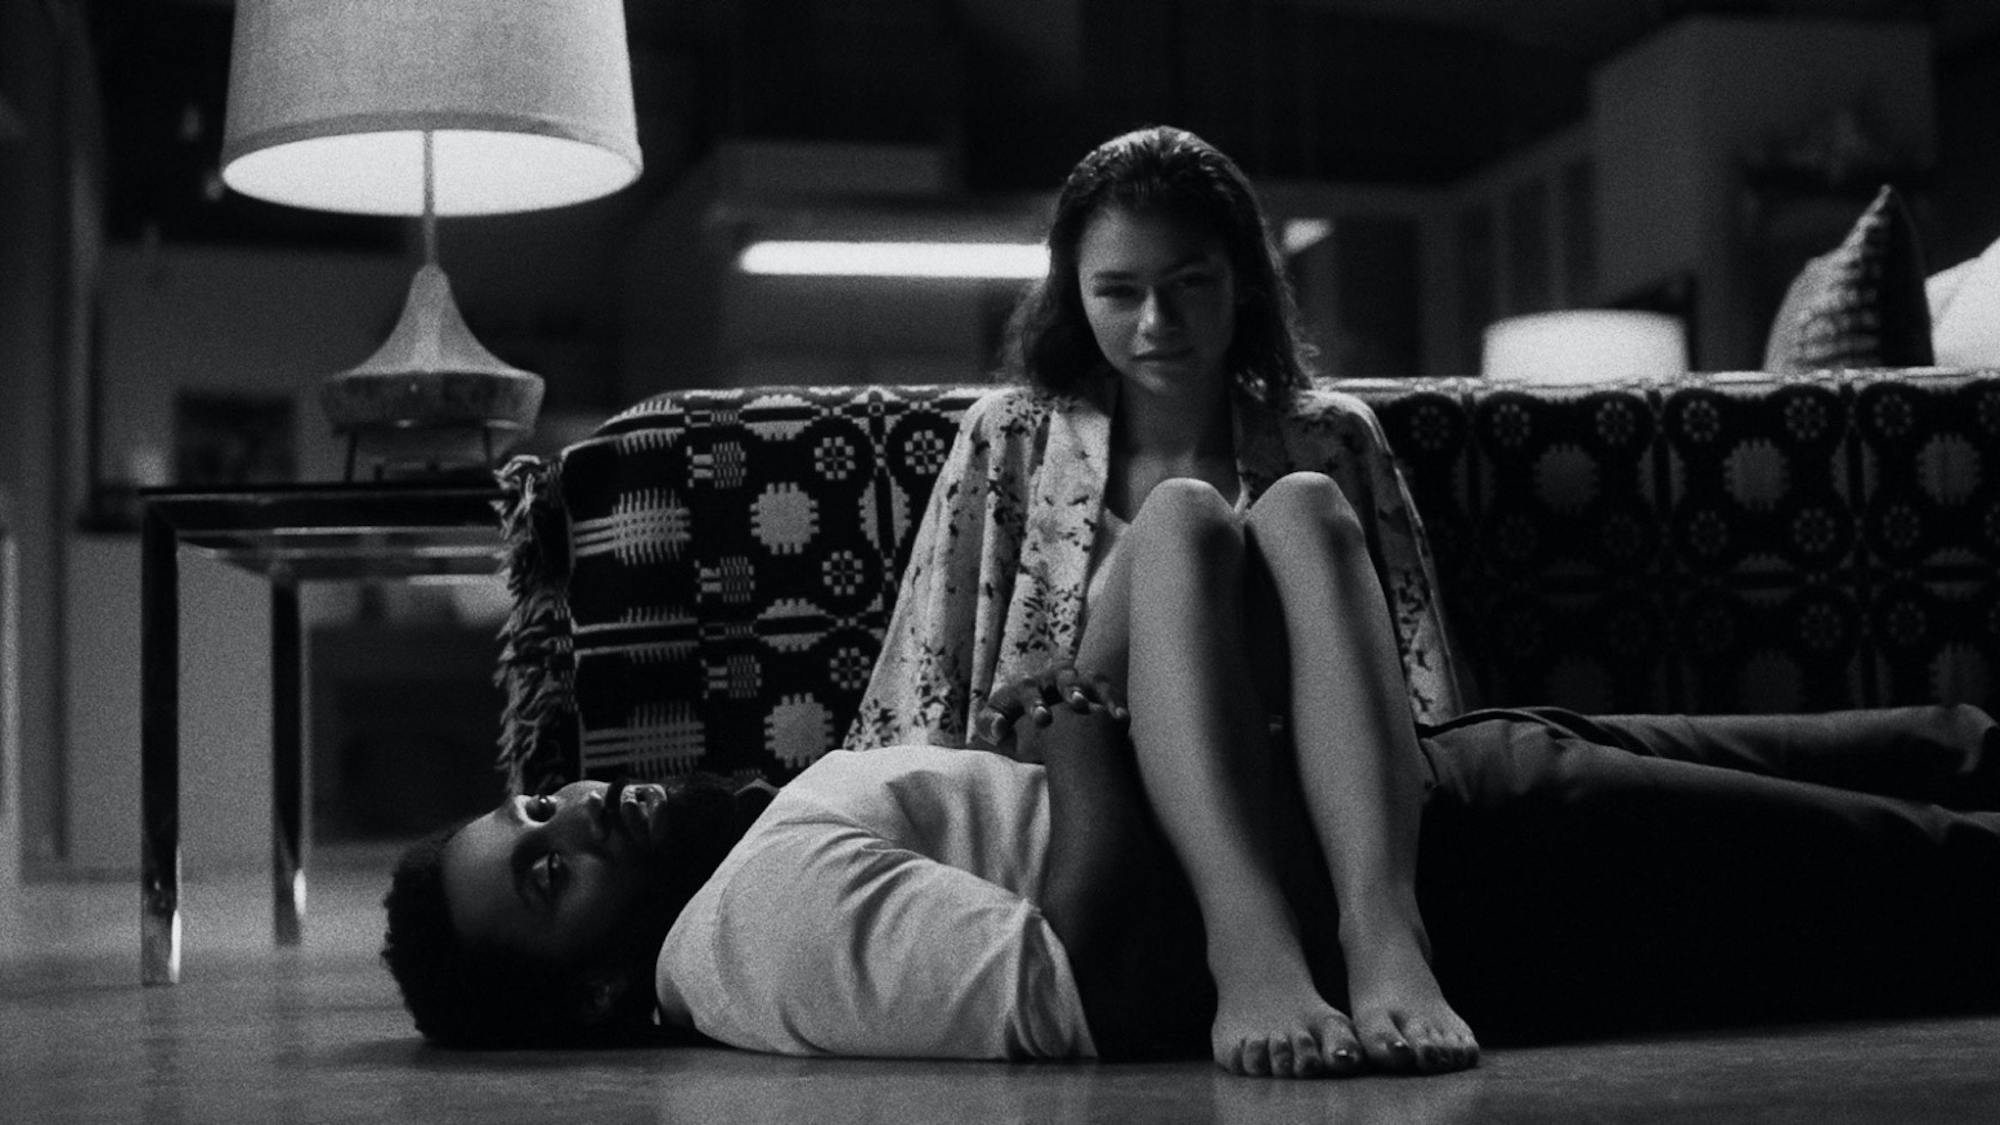 A still from Malcolm & Marie shows John David Washington, as Malcolm, lying on the floor while Zendaya, as Marie, sits with her legs swung over his torso.